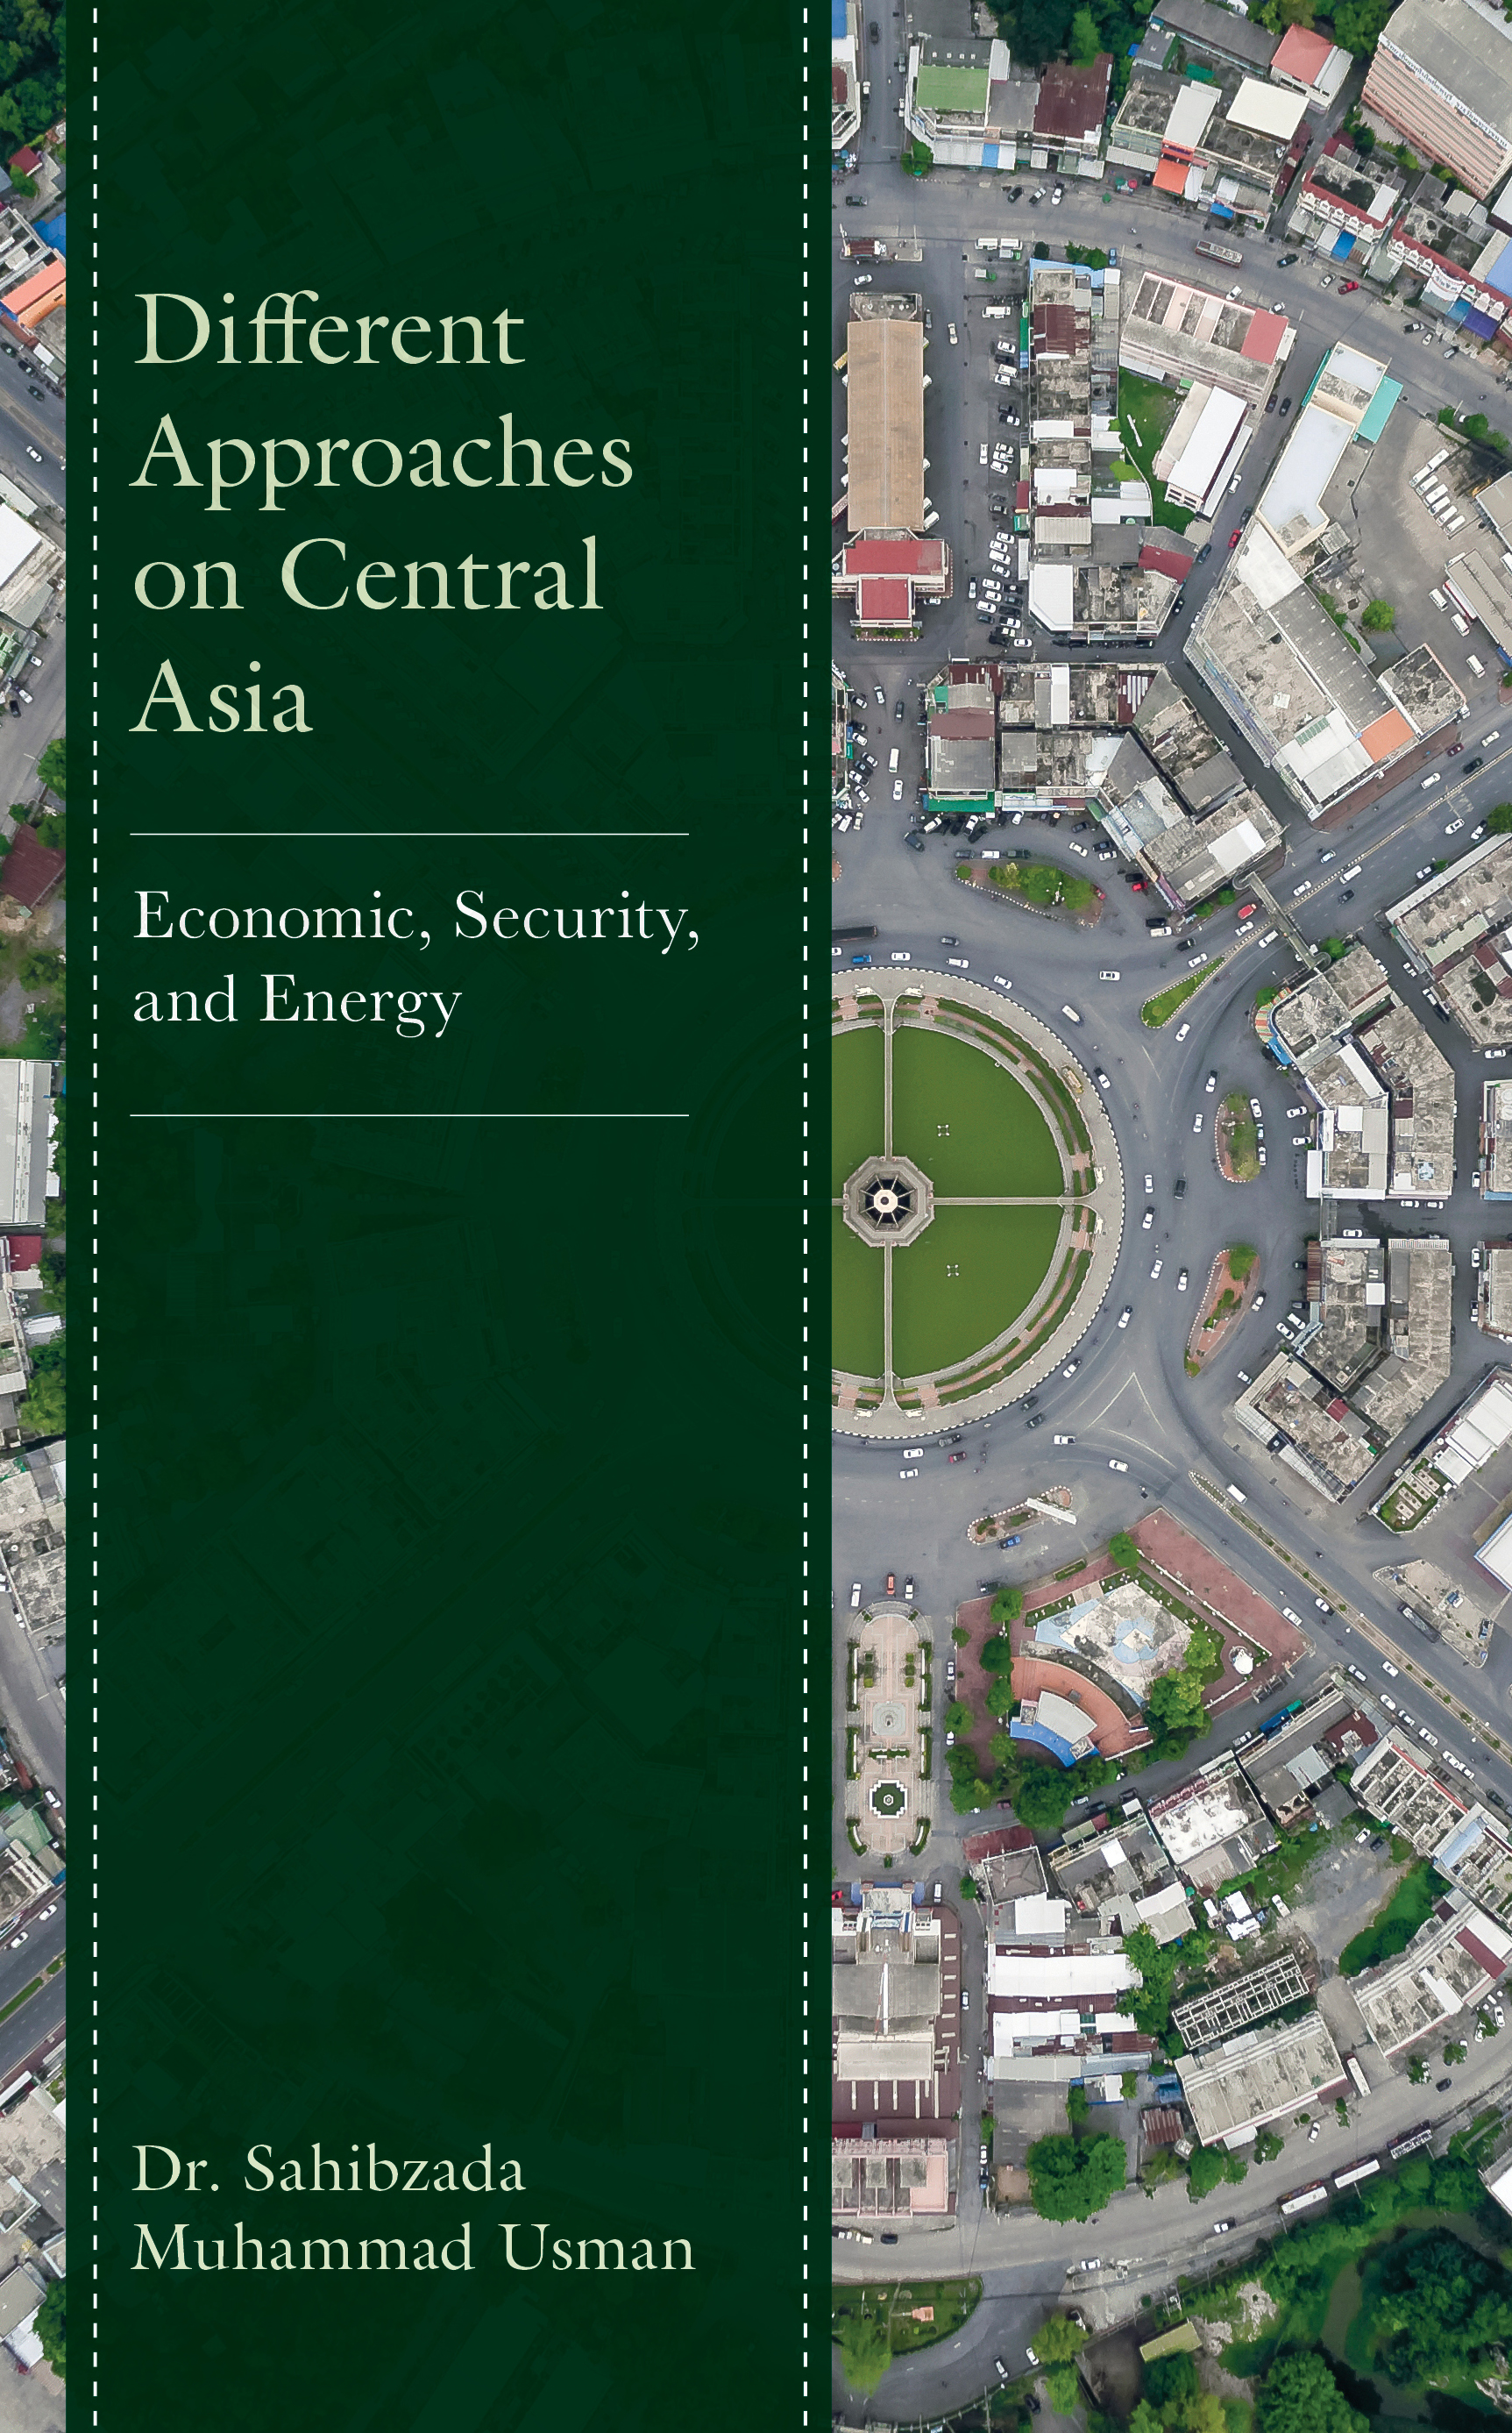 Different Approaches on Central Asia: Economic, Security, and Energy